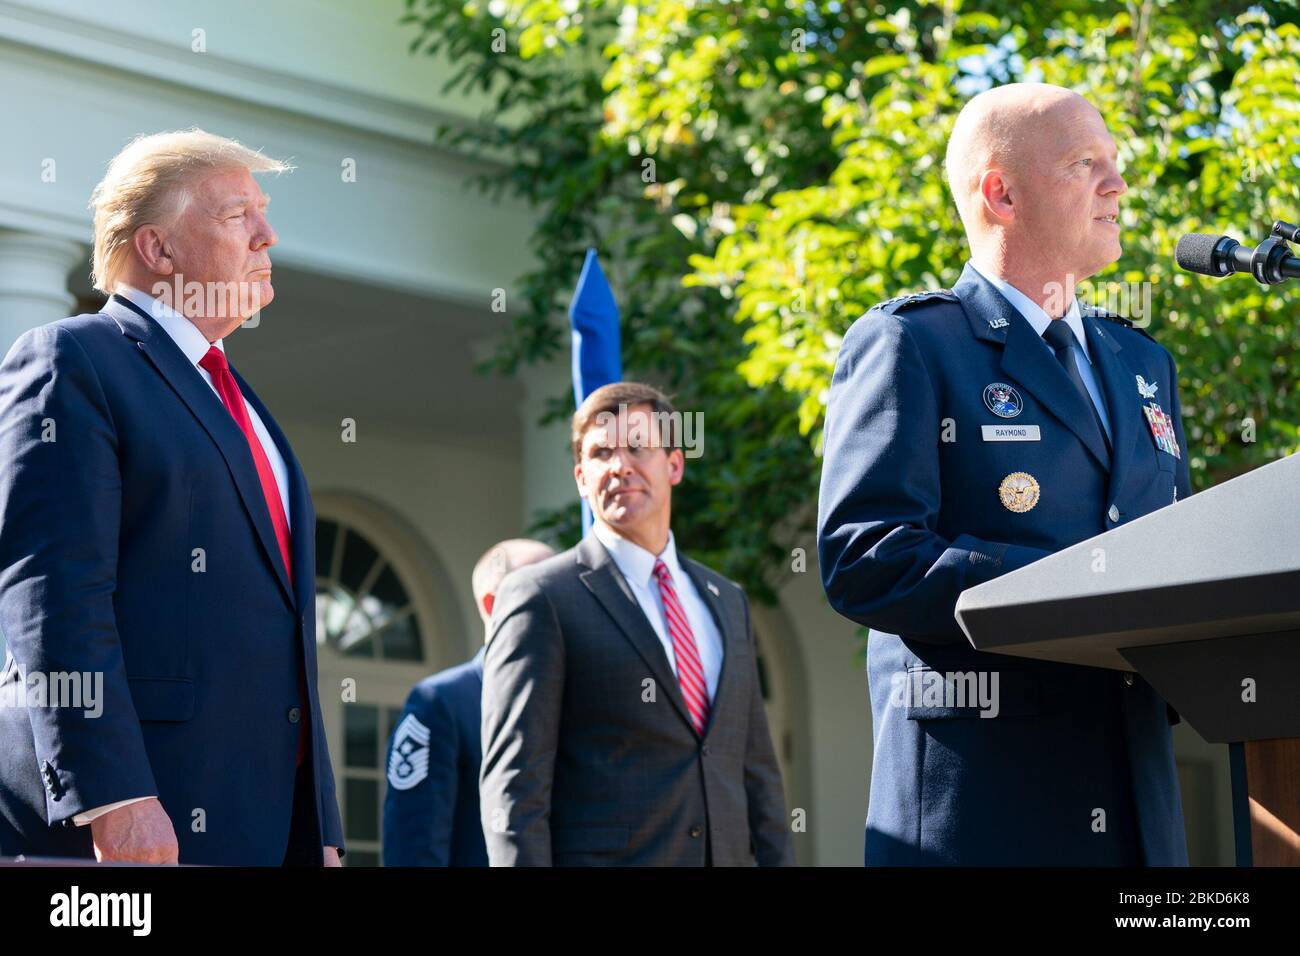 Chairman of the Joint Chiefs of Staff General Joseph F. Dunford  listens as President Donald J. Trump delivers remarks at the Establishment of the U.S. Space Command (USSPACECOM) Thursday, Aug. 29, 2019, in the Rose Garden of the White House. The Establishment of the U.S. Space Command Stock Photo